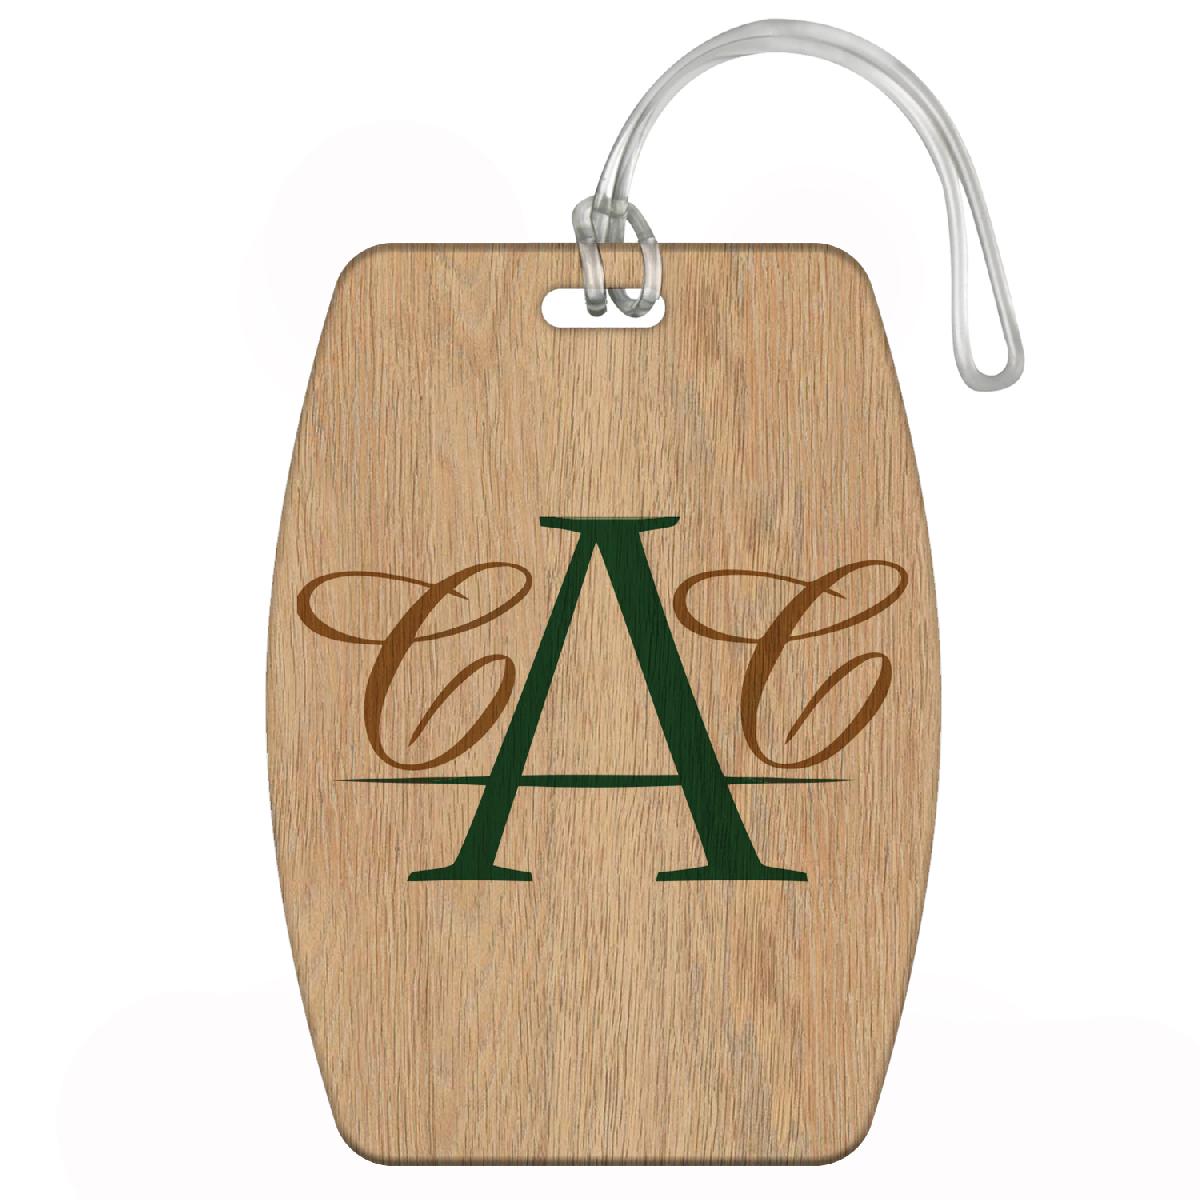 Wooden Bag Tag - 3.75" X 2.625" - 2 Sided Printing